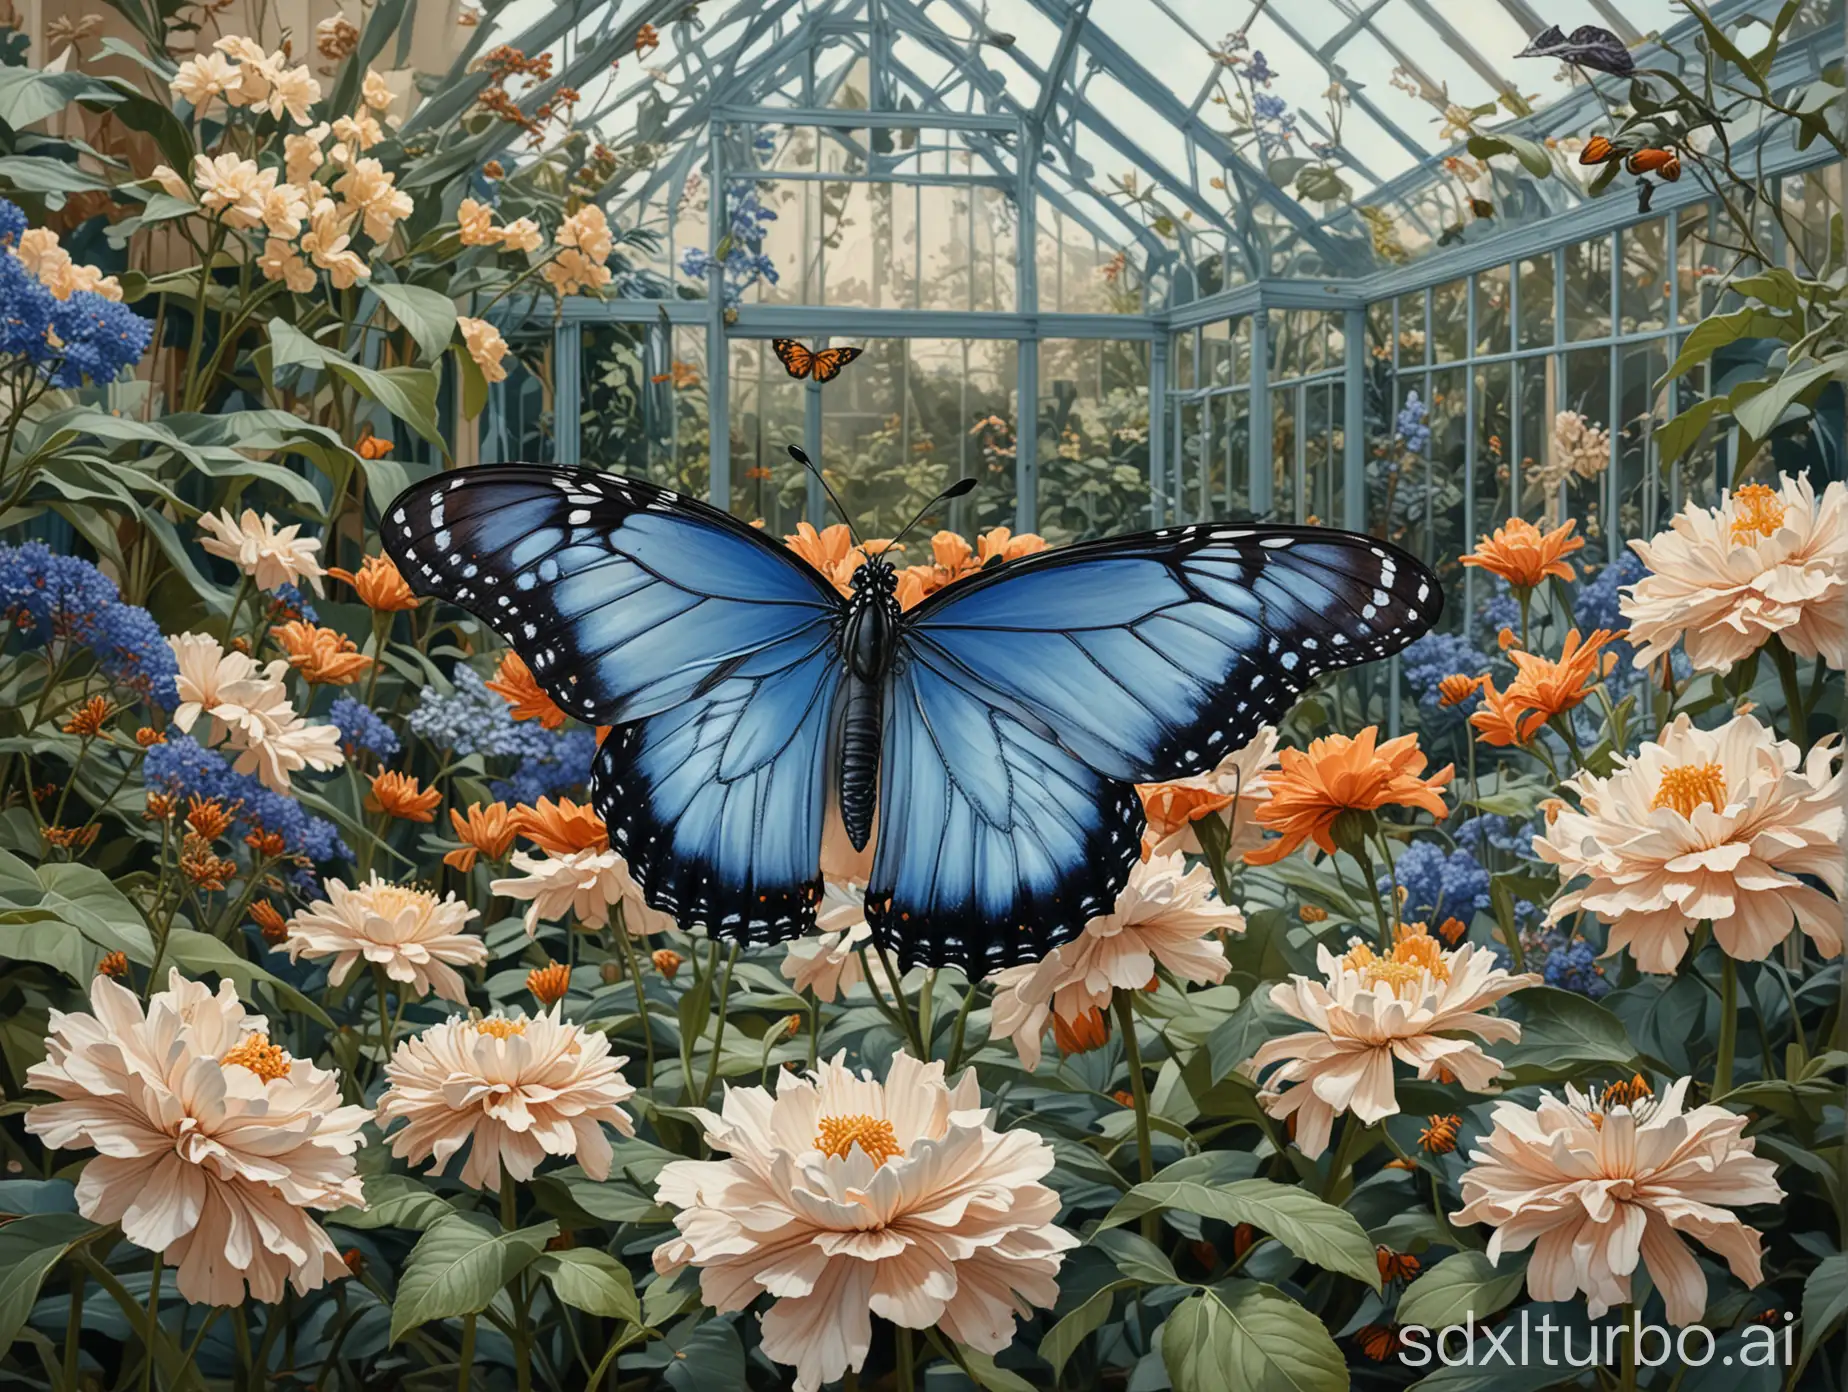 A full body shot of a Blue chromatic Monarch Butterfly, with the background of a flowery glasshouse garden, in the style of painting by Leyendecker.